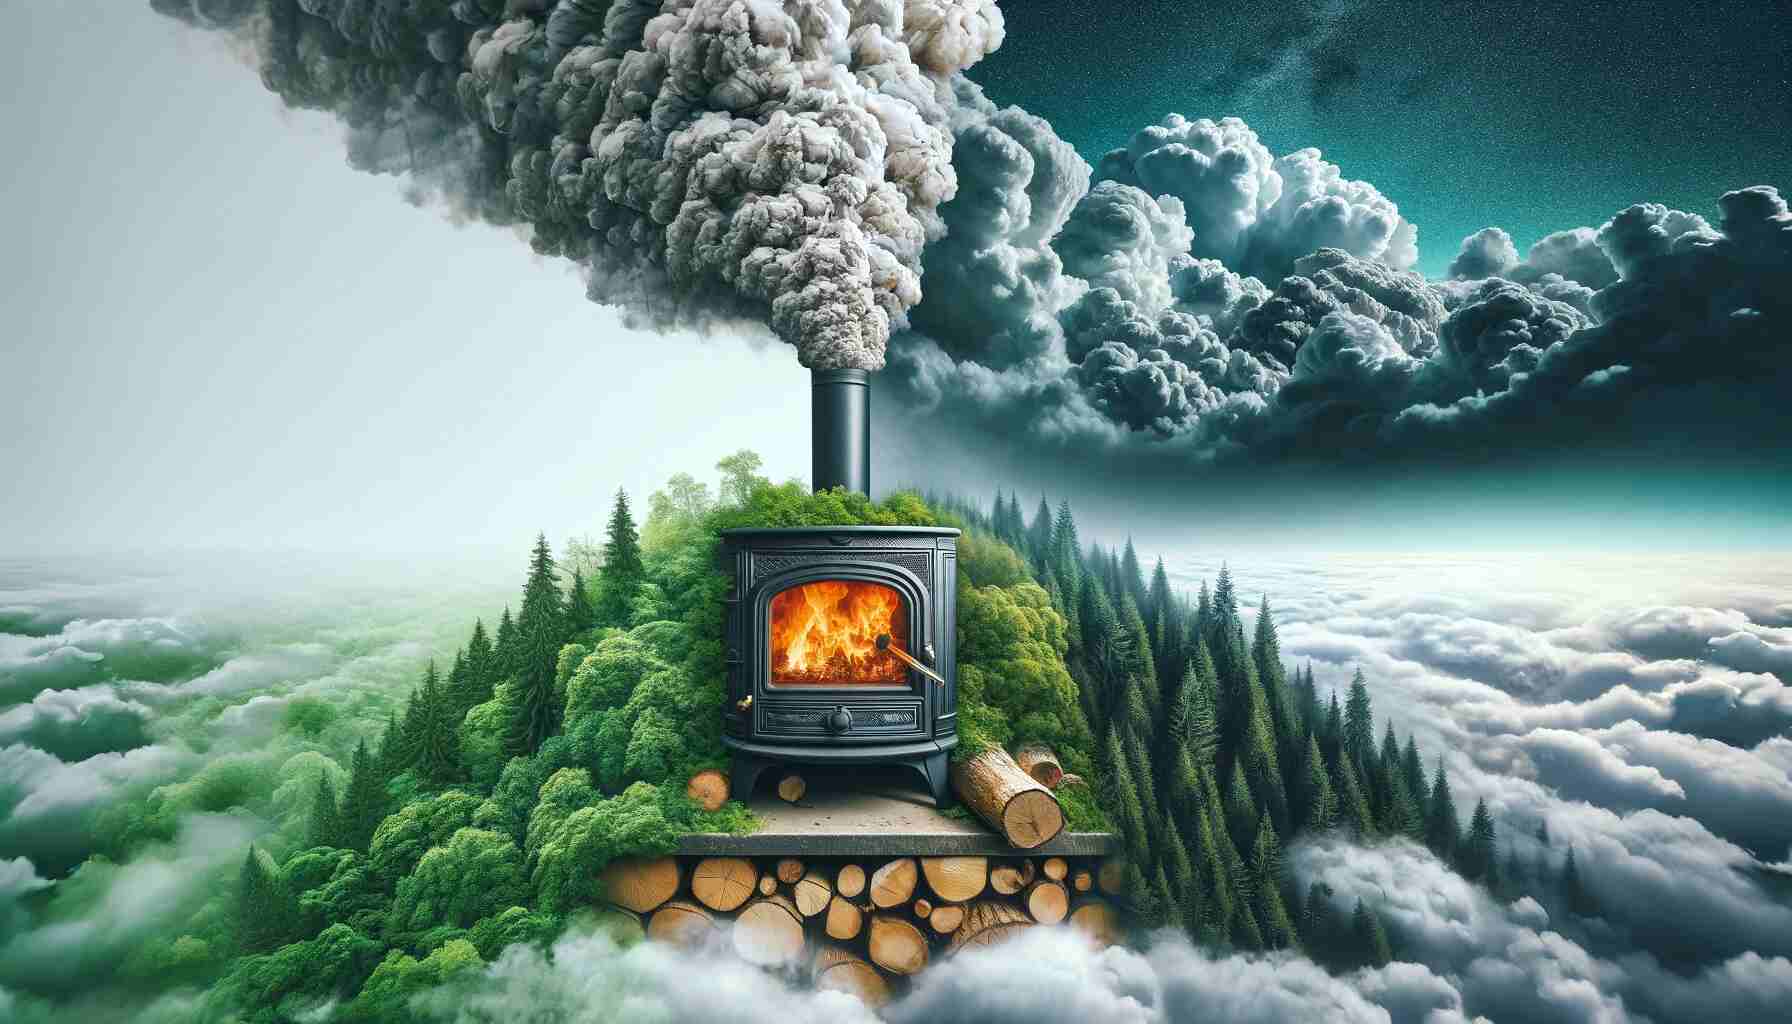 The image features a wood burning stove in the foreground with smoke rising from its chimney. This smoke merges into a background that transitions from a lush, green forest on one side to a polluted, smog-filled sky on the other, symbolizing the environmental impact of wood burning stoves by contrasting their traditional appeal with their potential harm to air quality and forests.